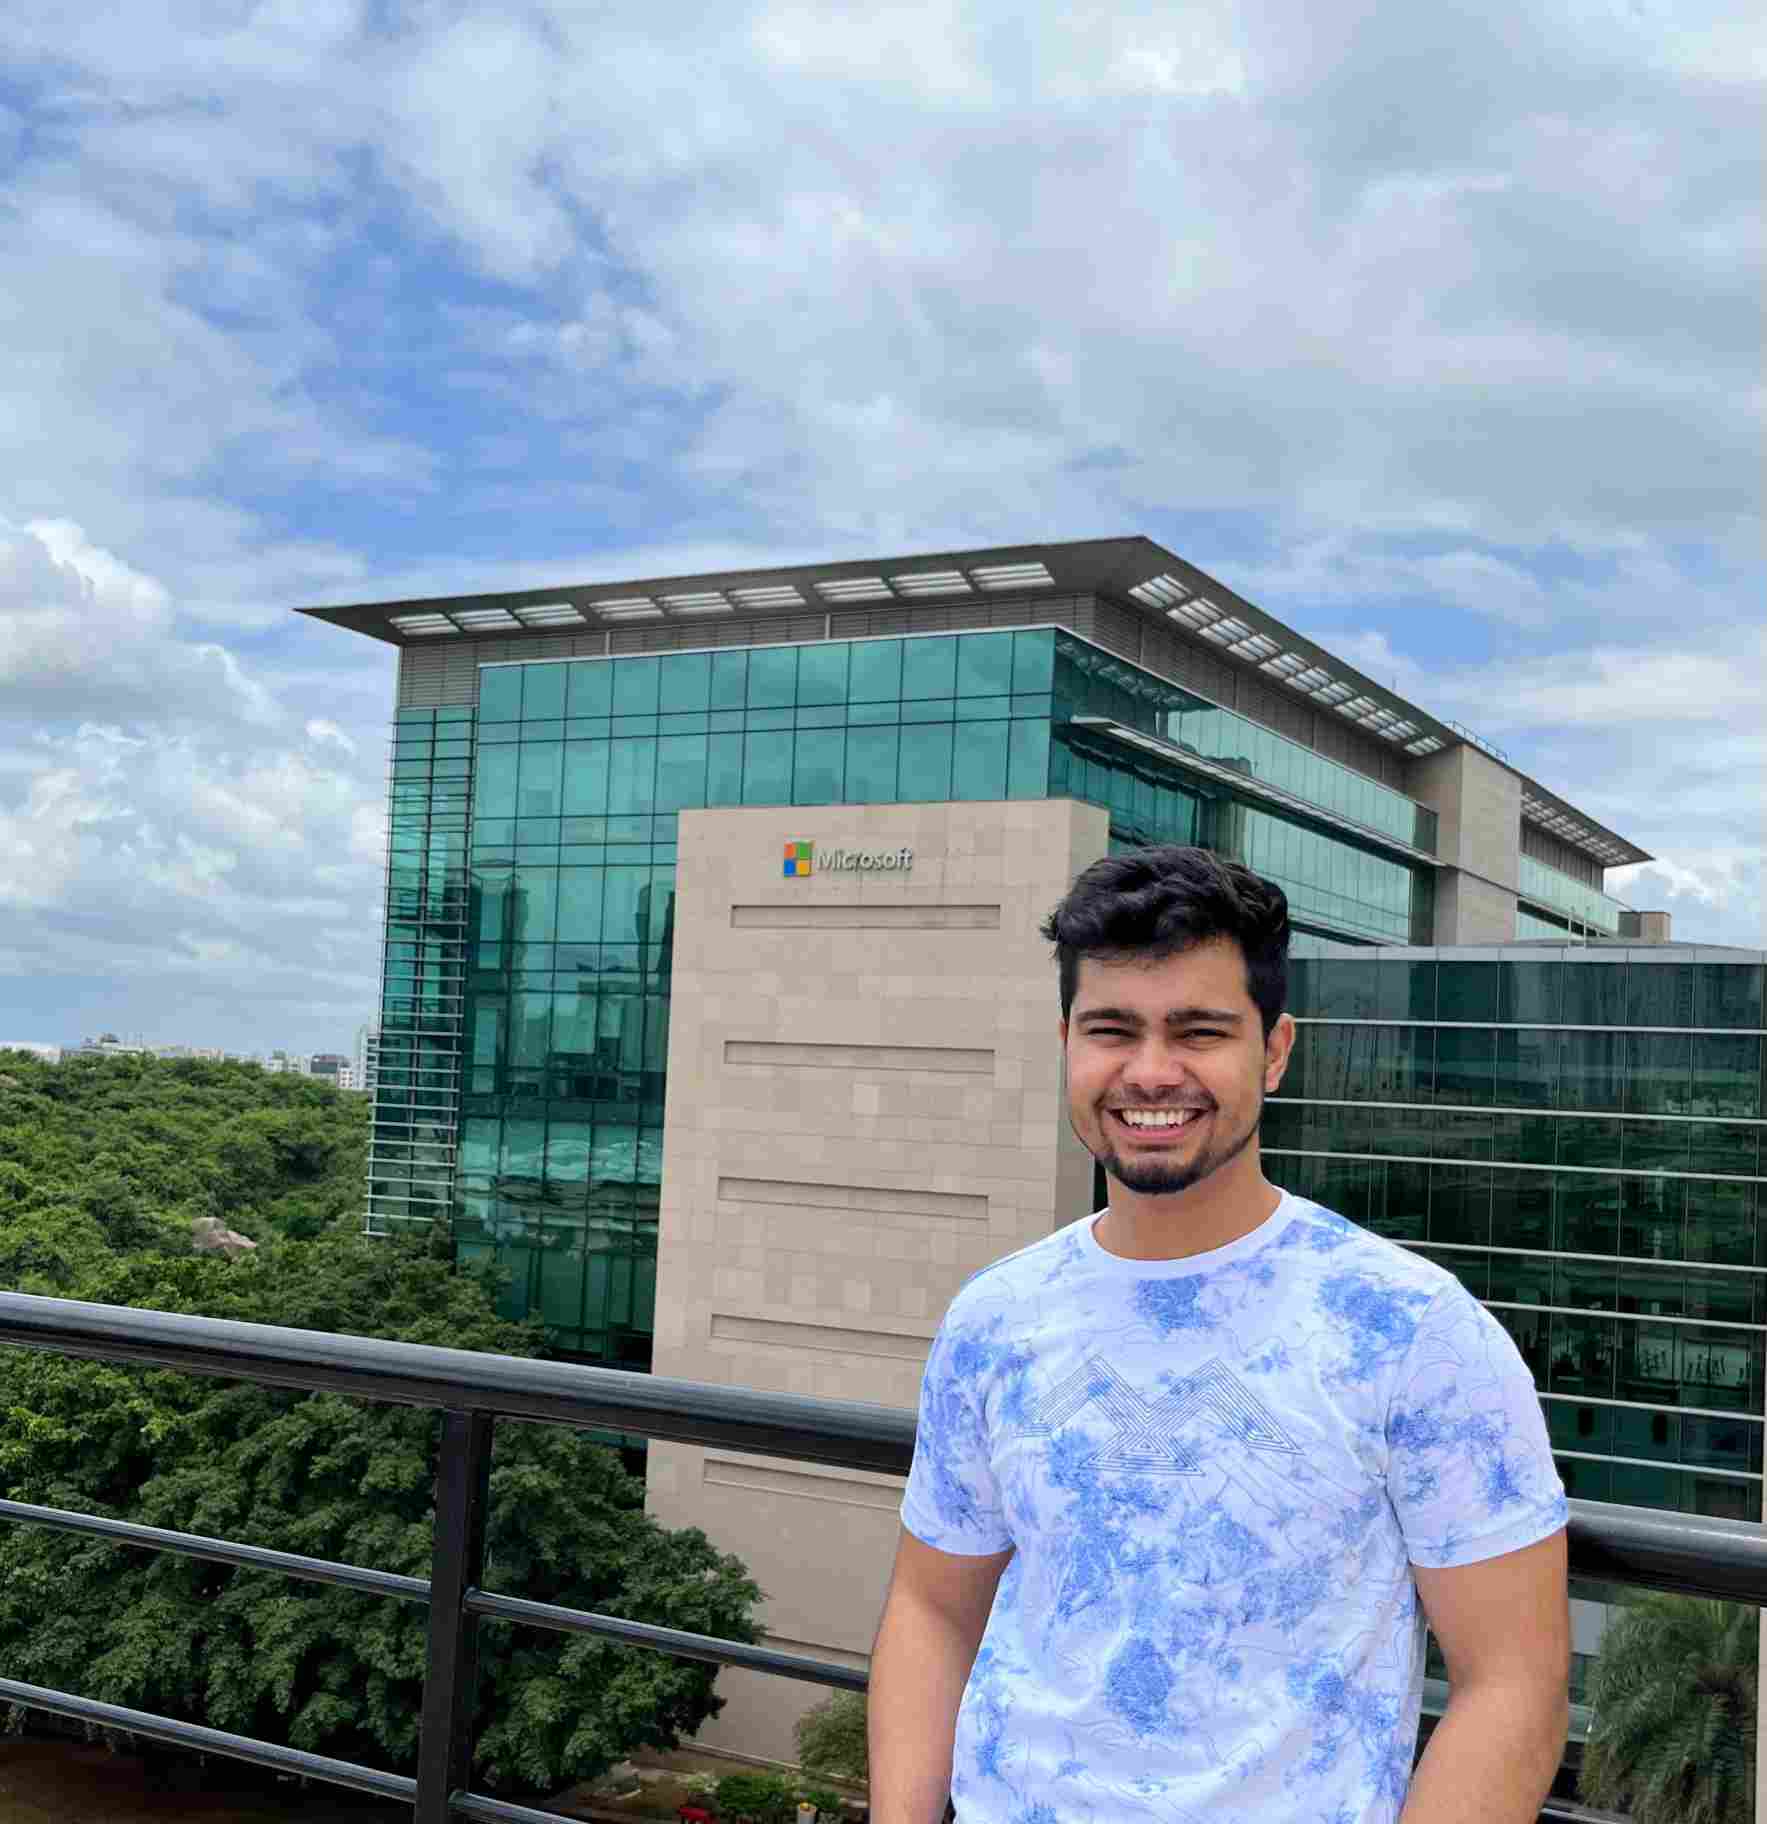 Nishant Chahar is a 22 year old Software Engineer working at Microsoft 